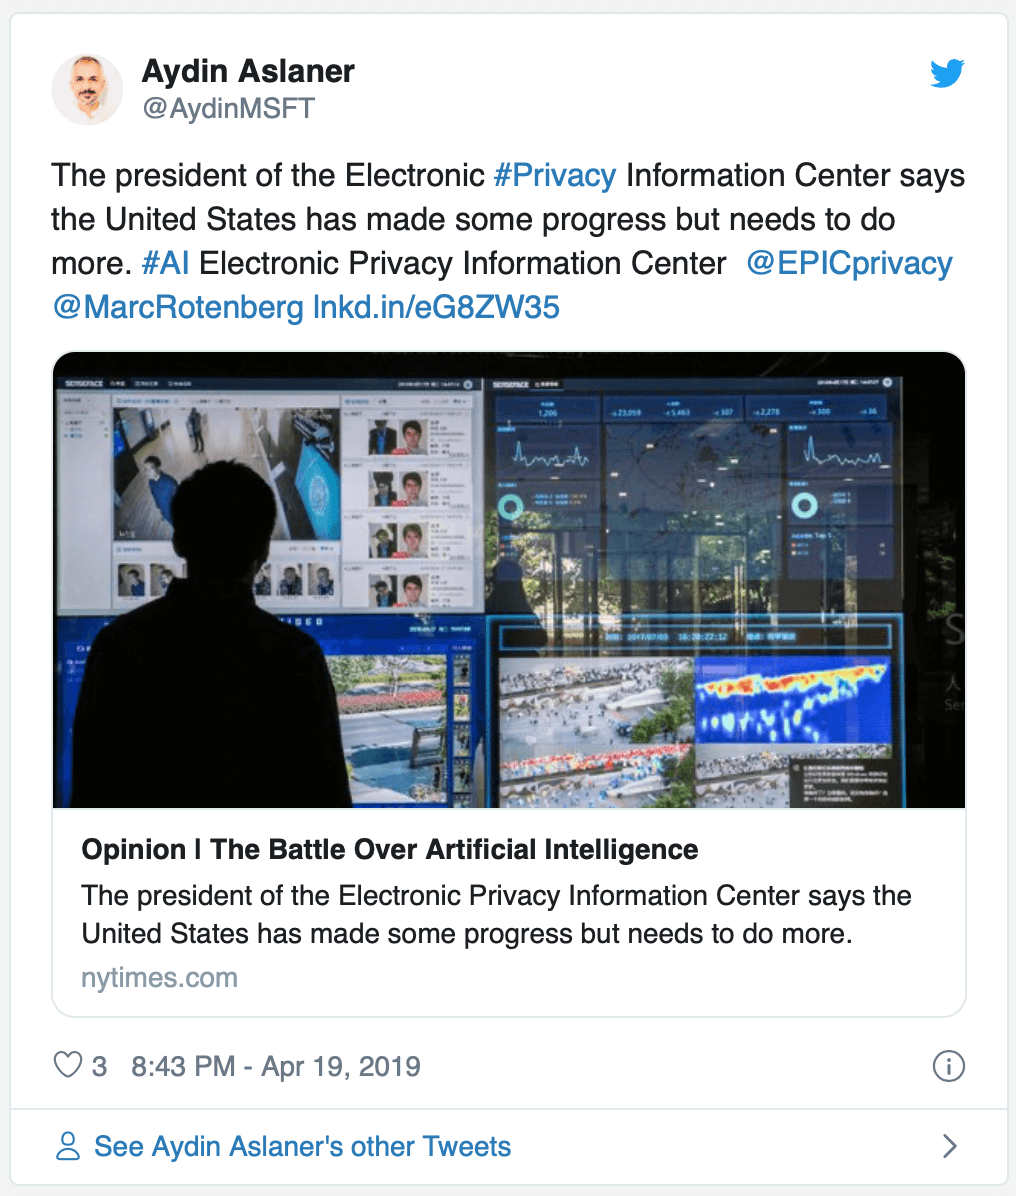 A tweet linking an opinion article: "The president of the Electronic Privacy Information Center says the United States has made some progress but needs to do more."